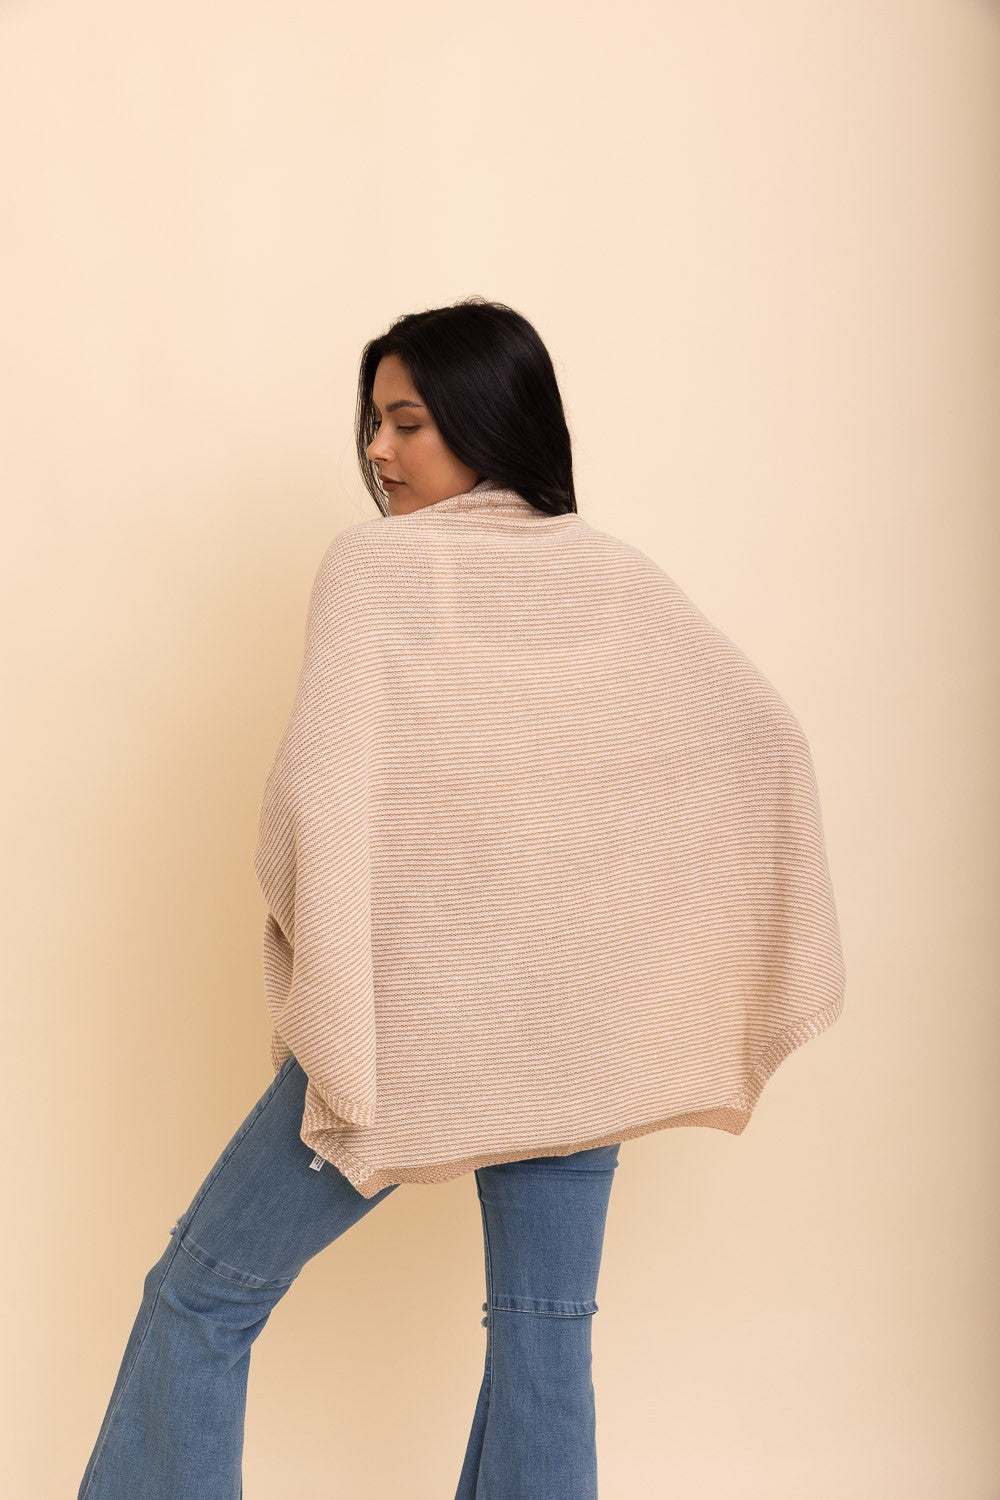 Come Cuddle Cardigan (One Size)